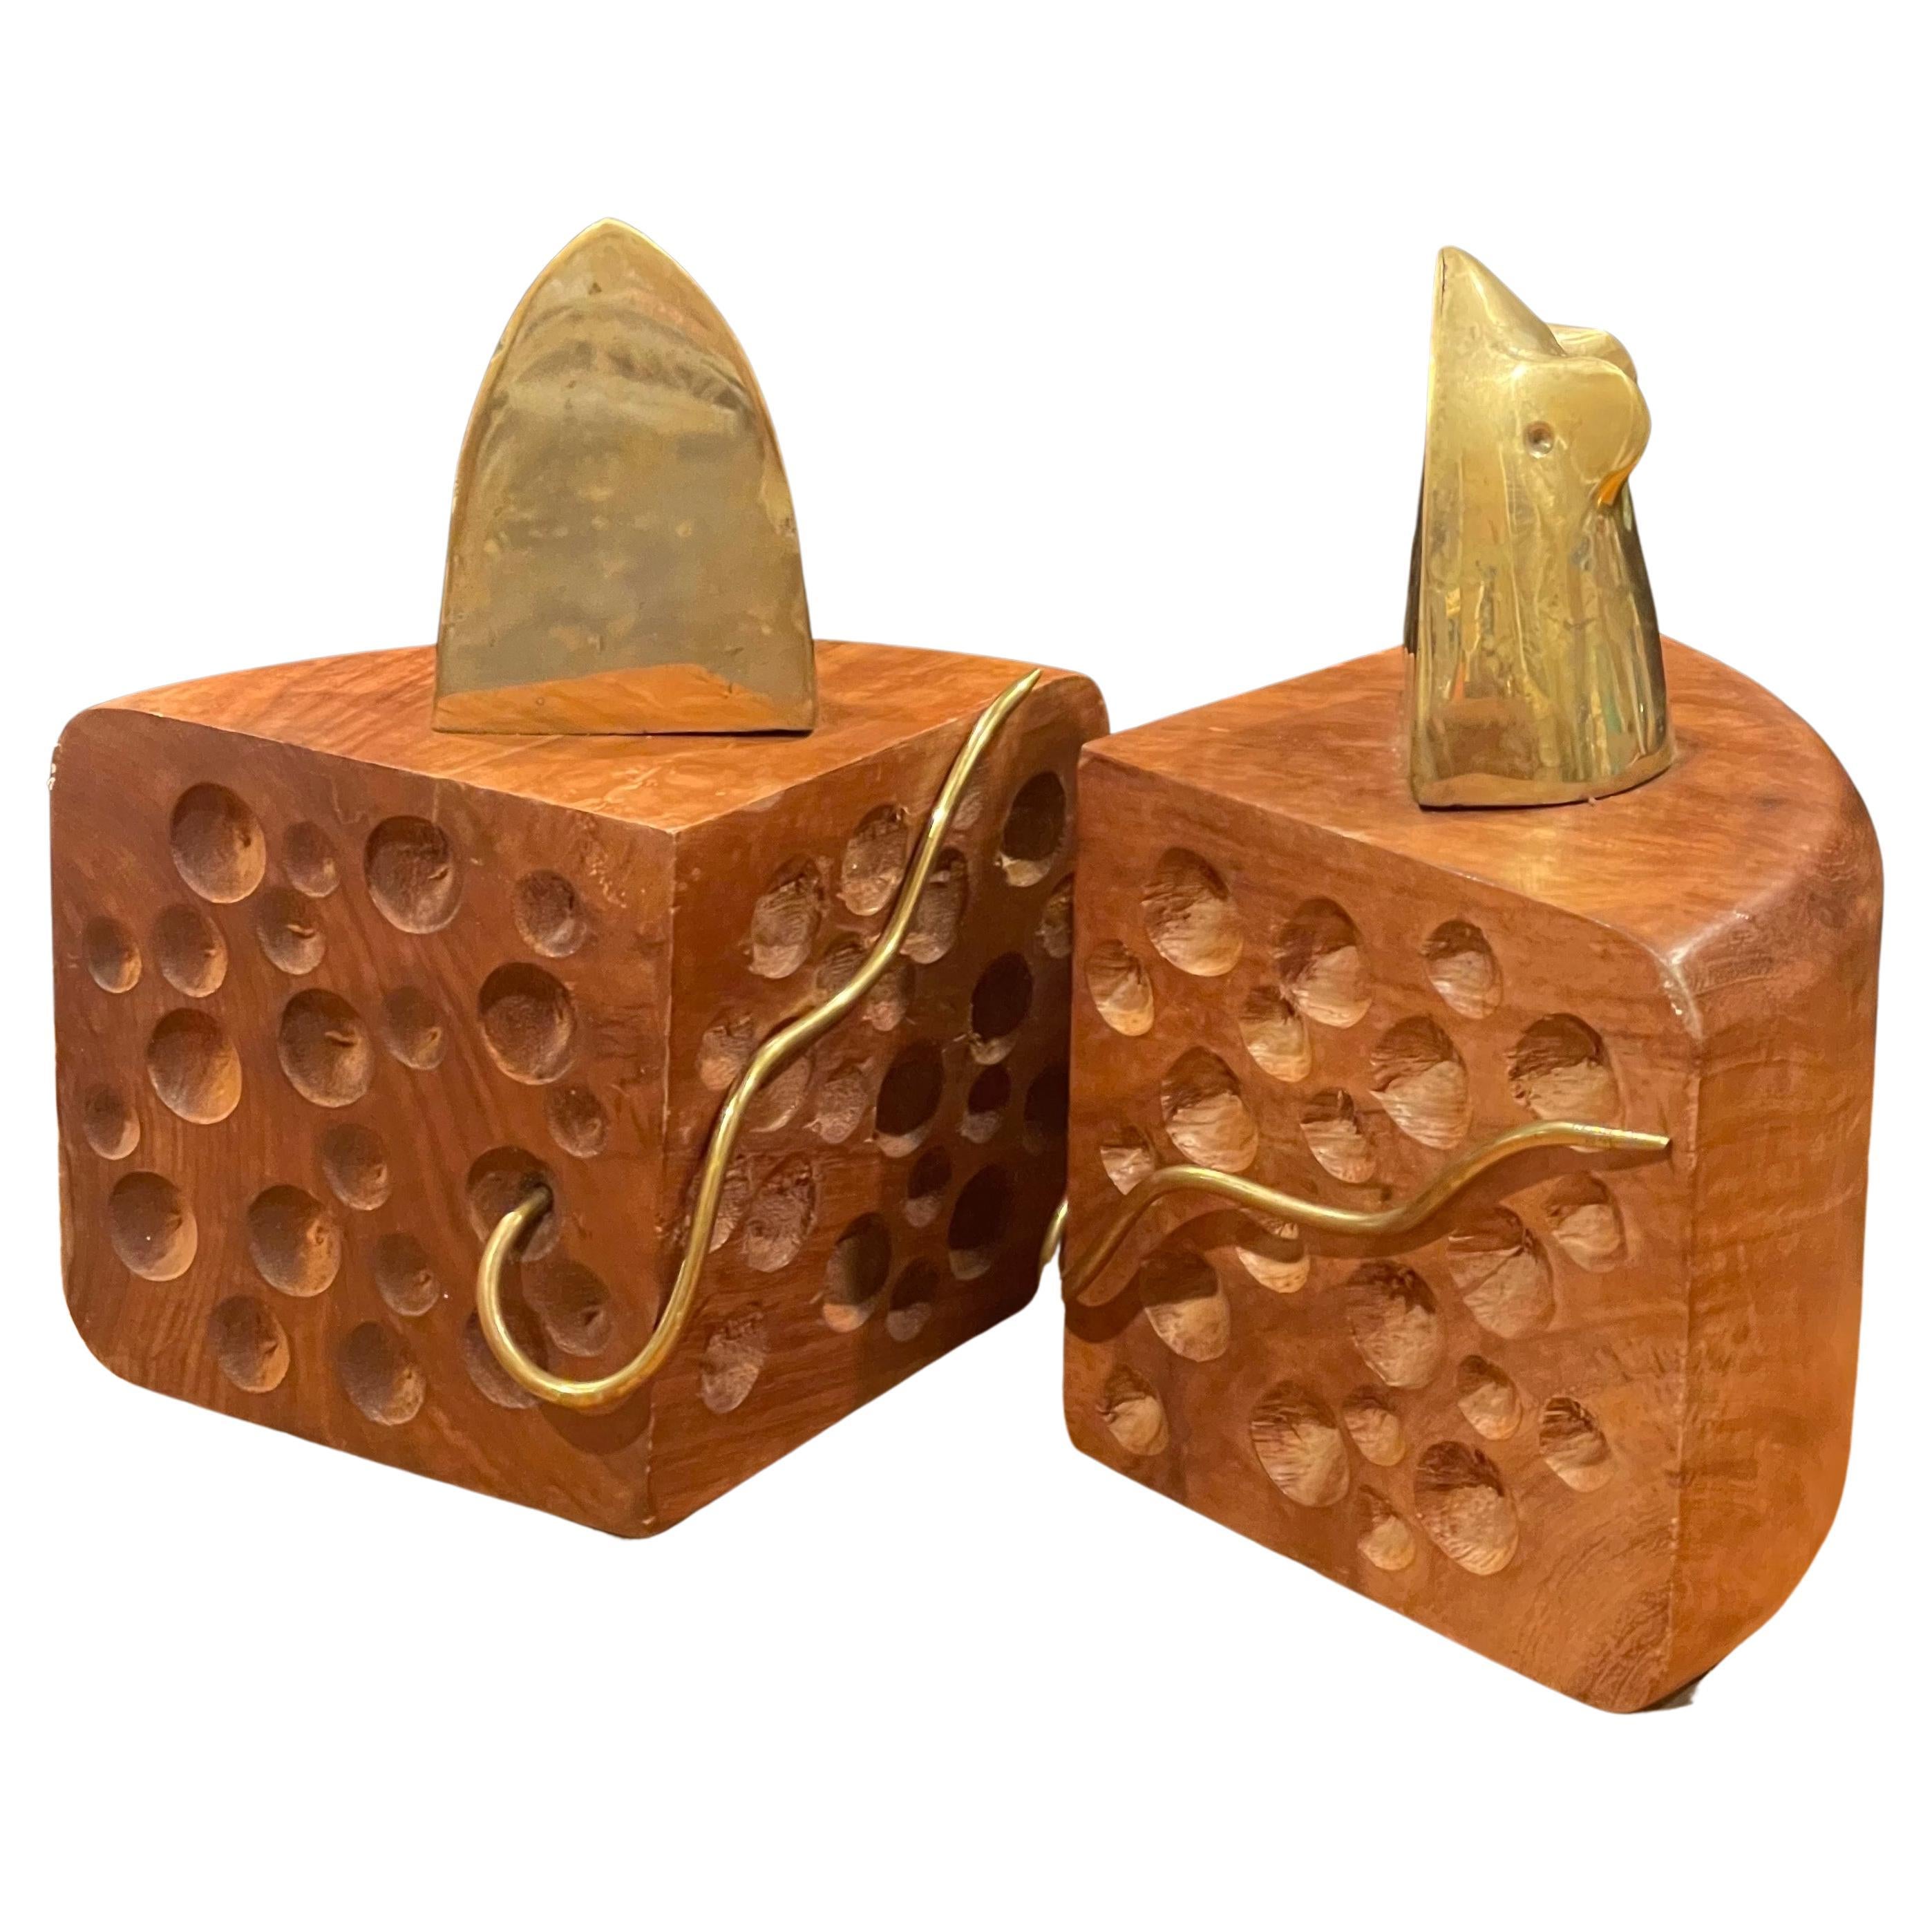 A whimsical pair of vintage MCM brass mouse on walnut cheese wedge bookends, circa 1970s. The bookends are in very good vintage condition and measure 8.25